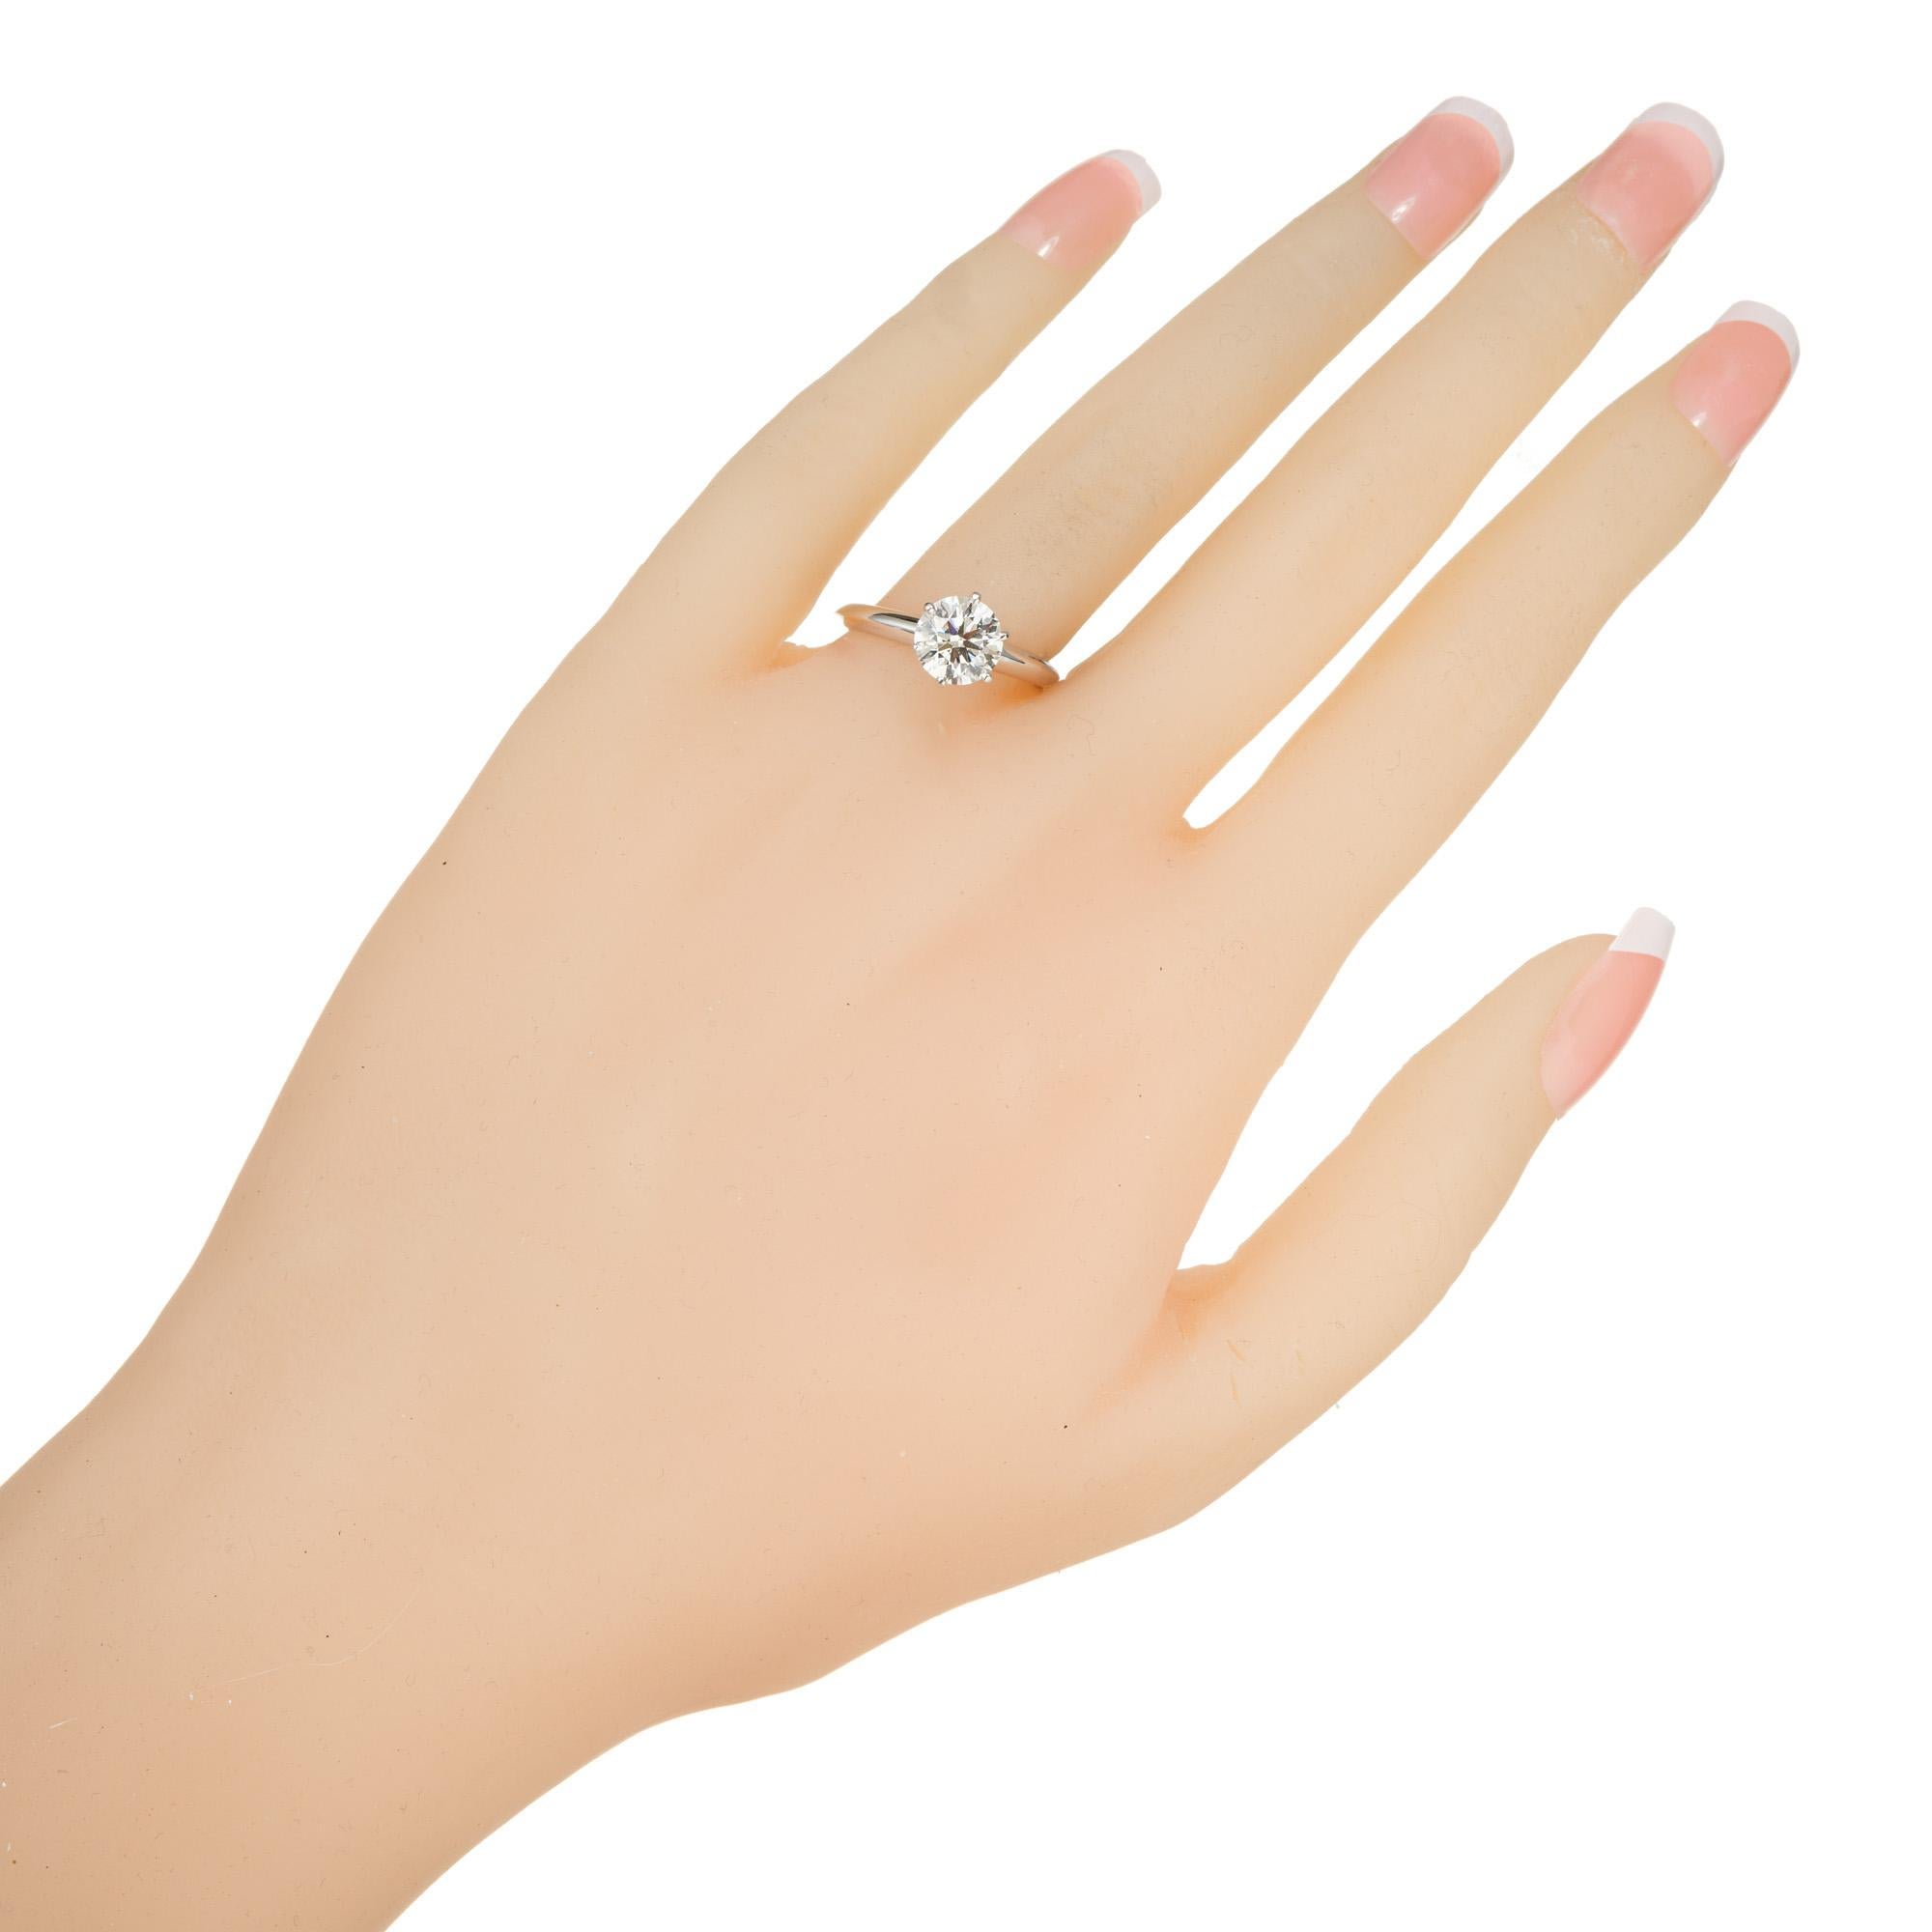 Tiffany & Co GIA 1.40 Carat Round Diamond Platinum Solitaire Engagement Ring  For Sale 2